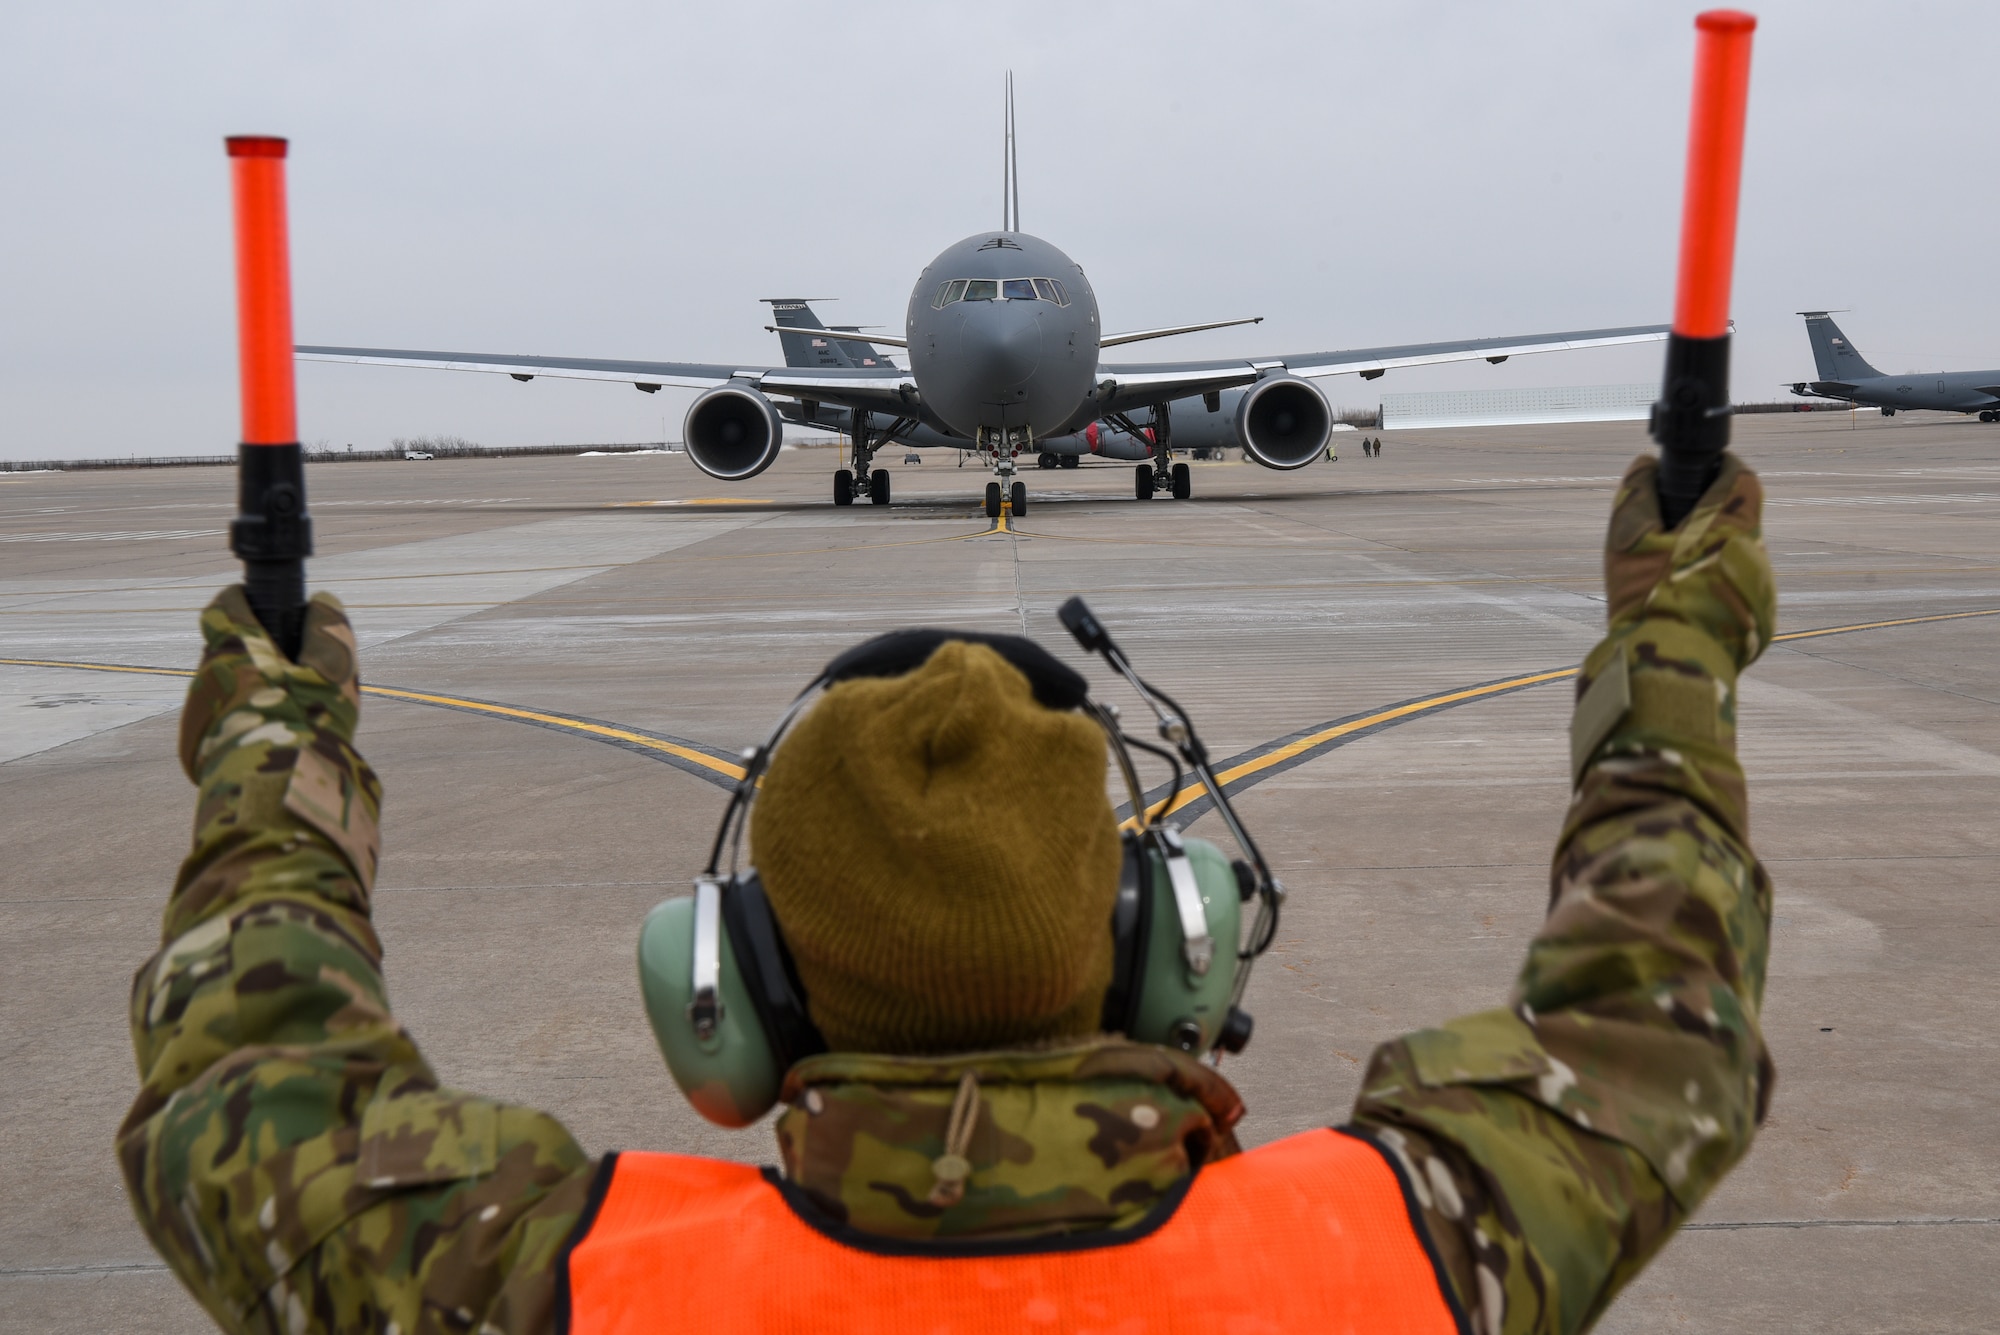 Master Sgt. Arenda Jackson, 931st Aircraft Maintenance Squadron crew chief, marshals the KC-46A Pegasus on the flightline Feb. 21, 2019, at McConnell Air Force Base Kan. The first KC-46 was delivered to McConnell Jan. 25, 2019. The Air Mobility Command will operate 179 KC-46s distributed to multiple bases across the Air Force. The aircraft is equipped for passengers, aeromedical evacuation and cargo capabilities. (U.S. Air Force photo by Airman 1st Class Alexi Myrick)